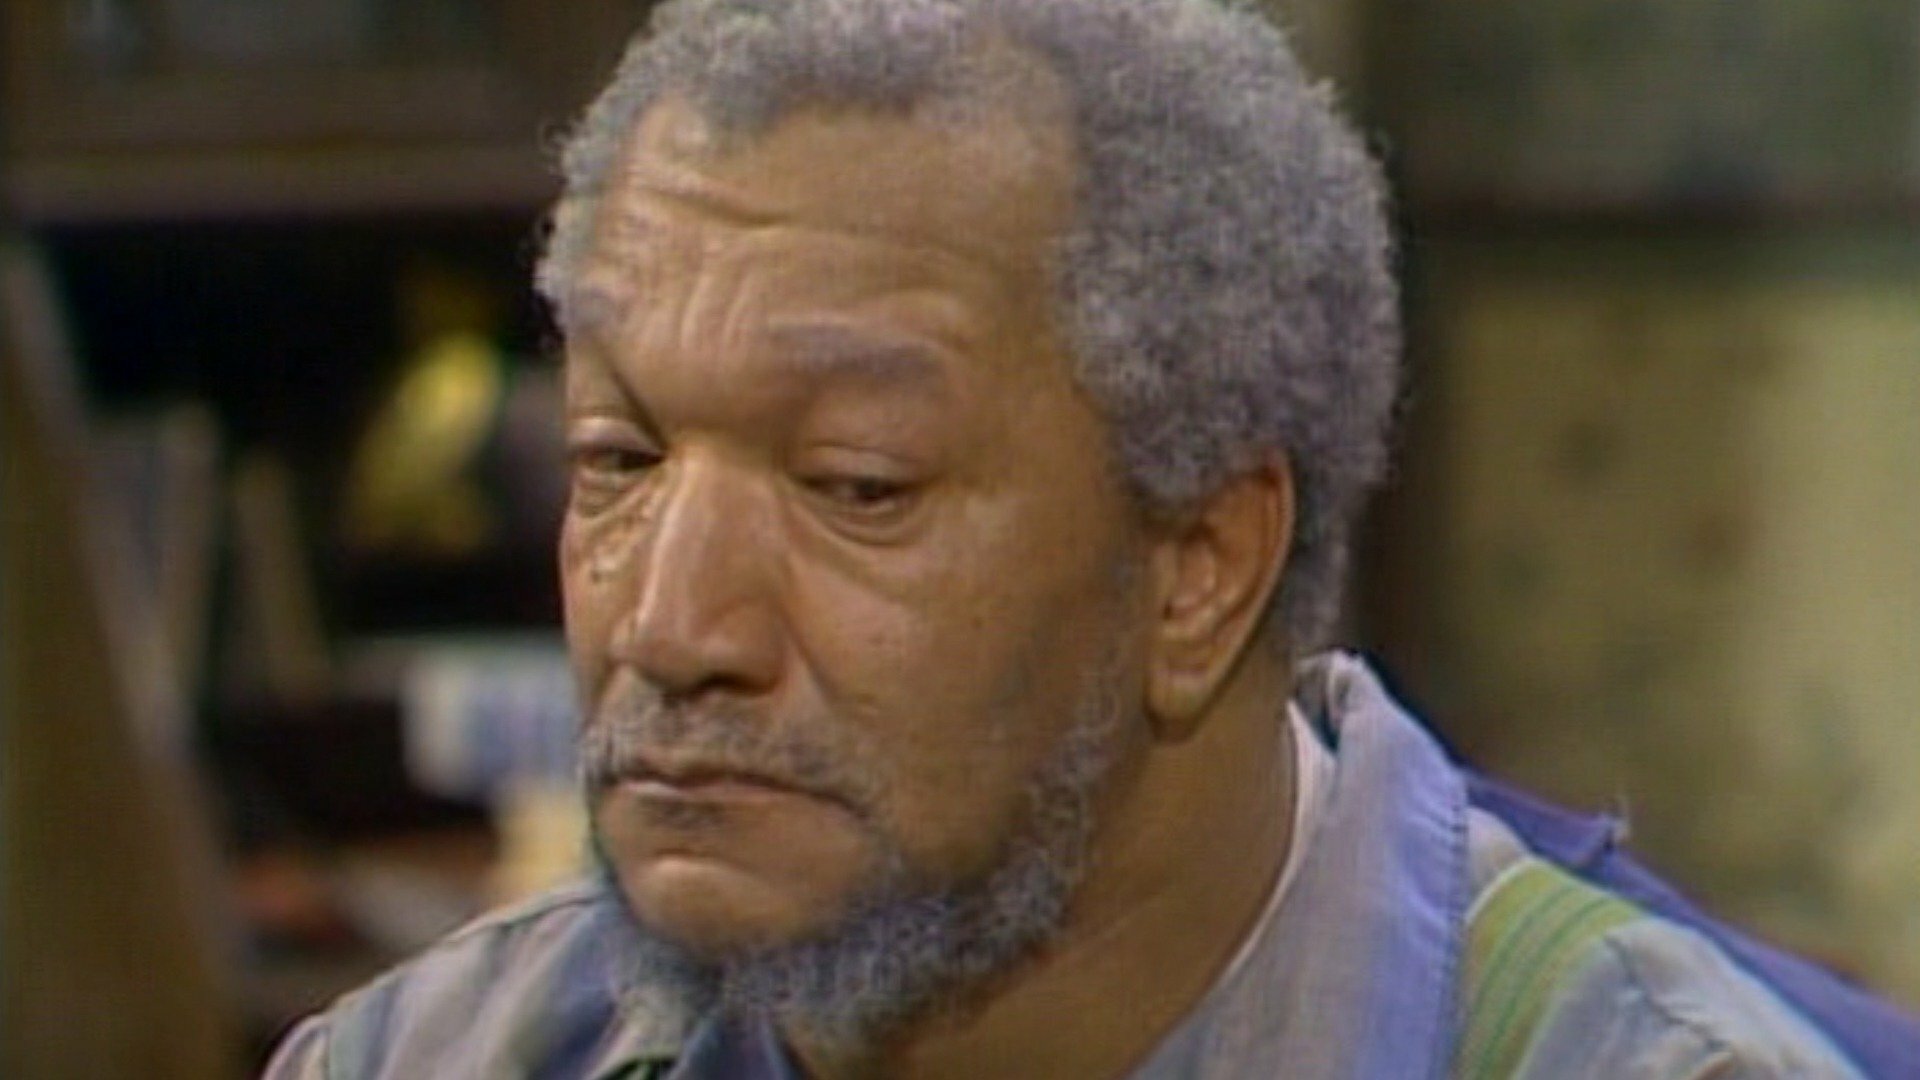 Sanford and Son Season 1 Episode 6 - We Were Robbed